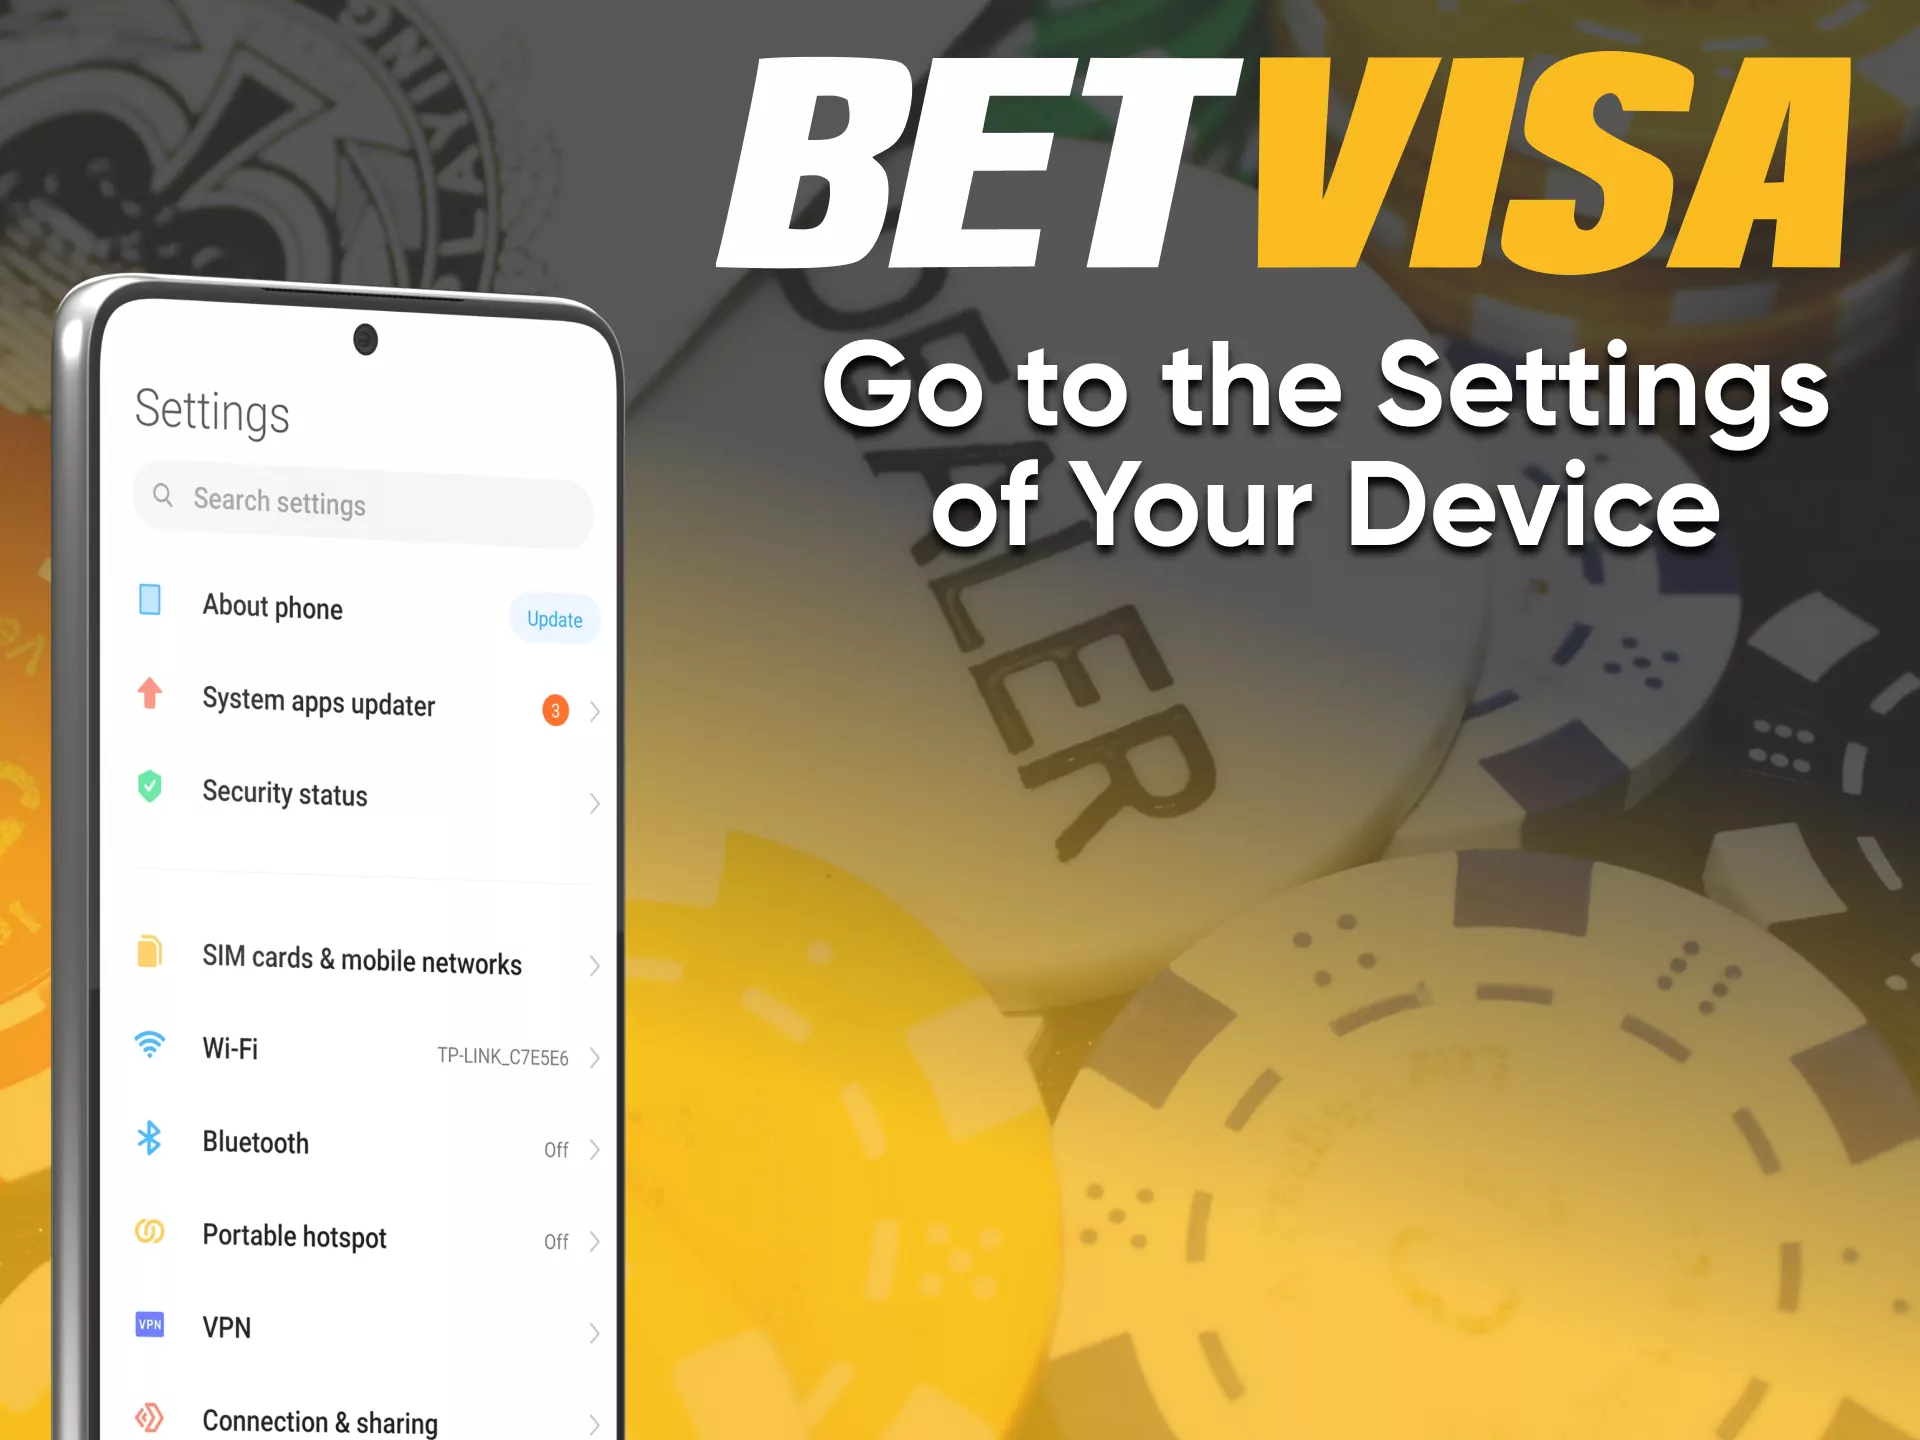 Download the application on your device from BetVisa.